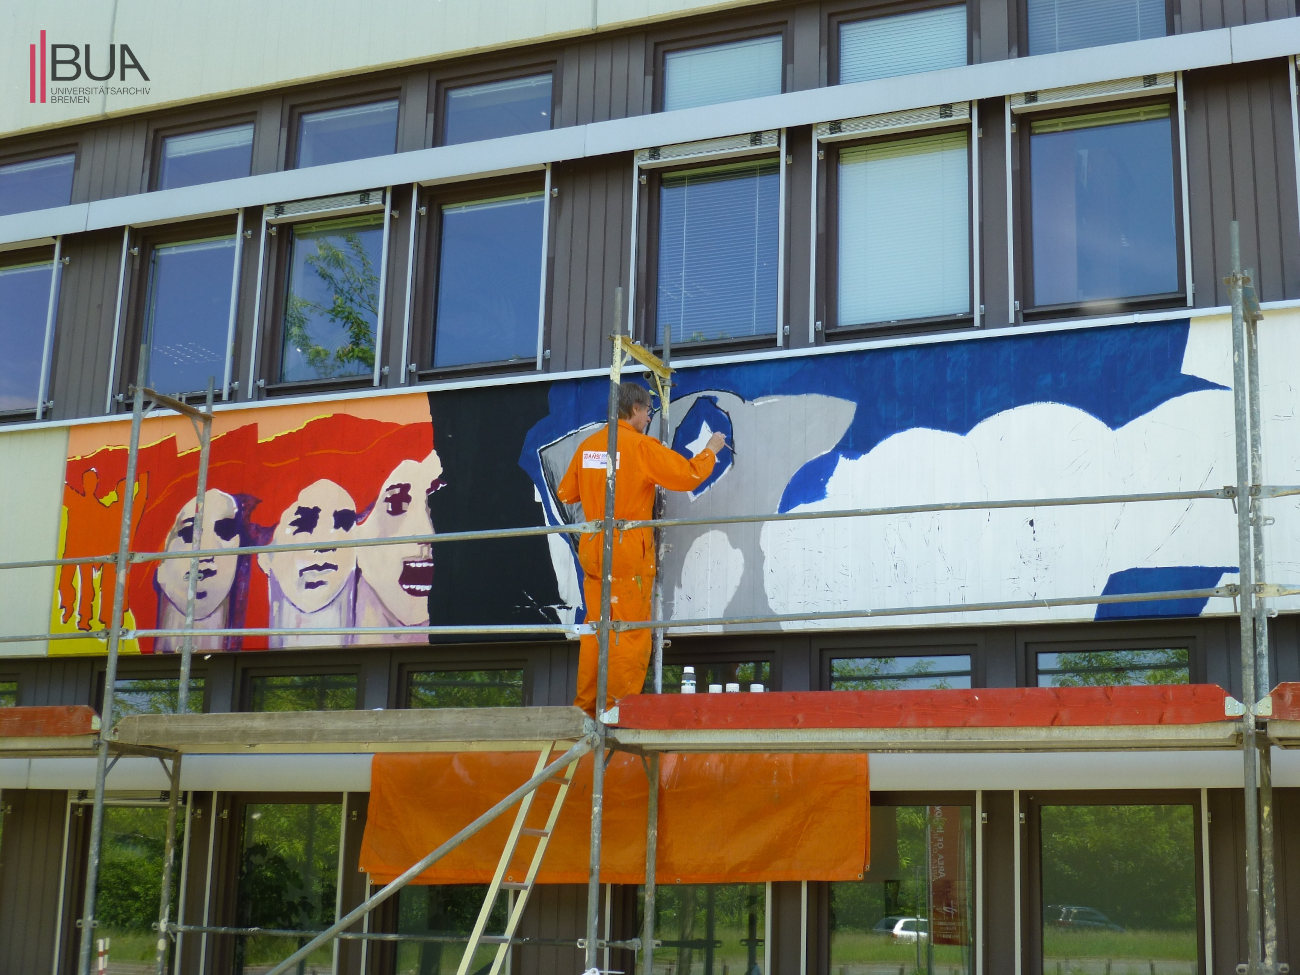 Artist Jub Mönster reconstructs the mural at GW 1